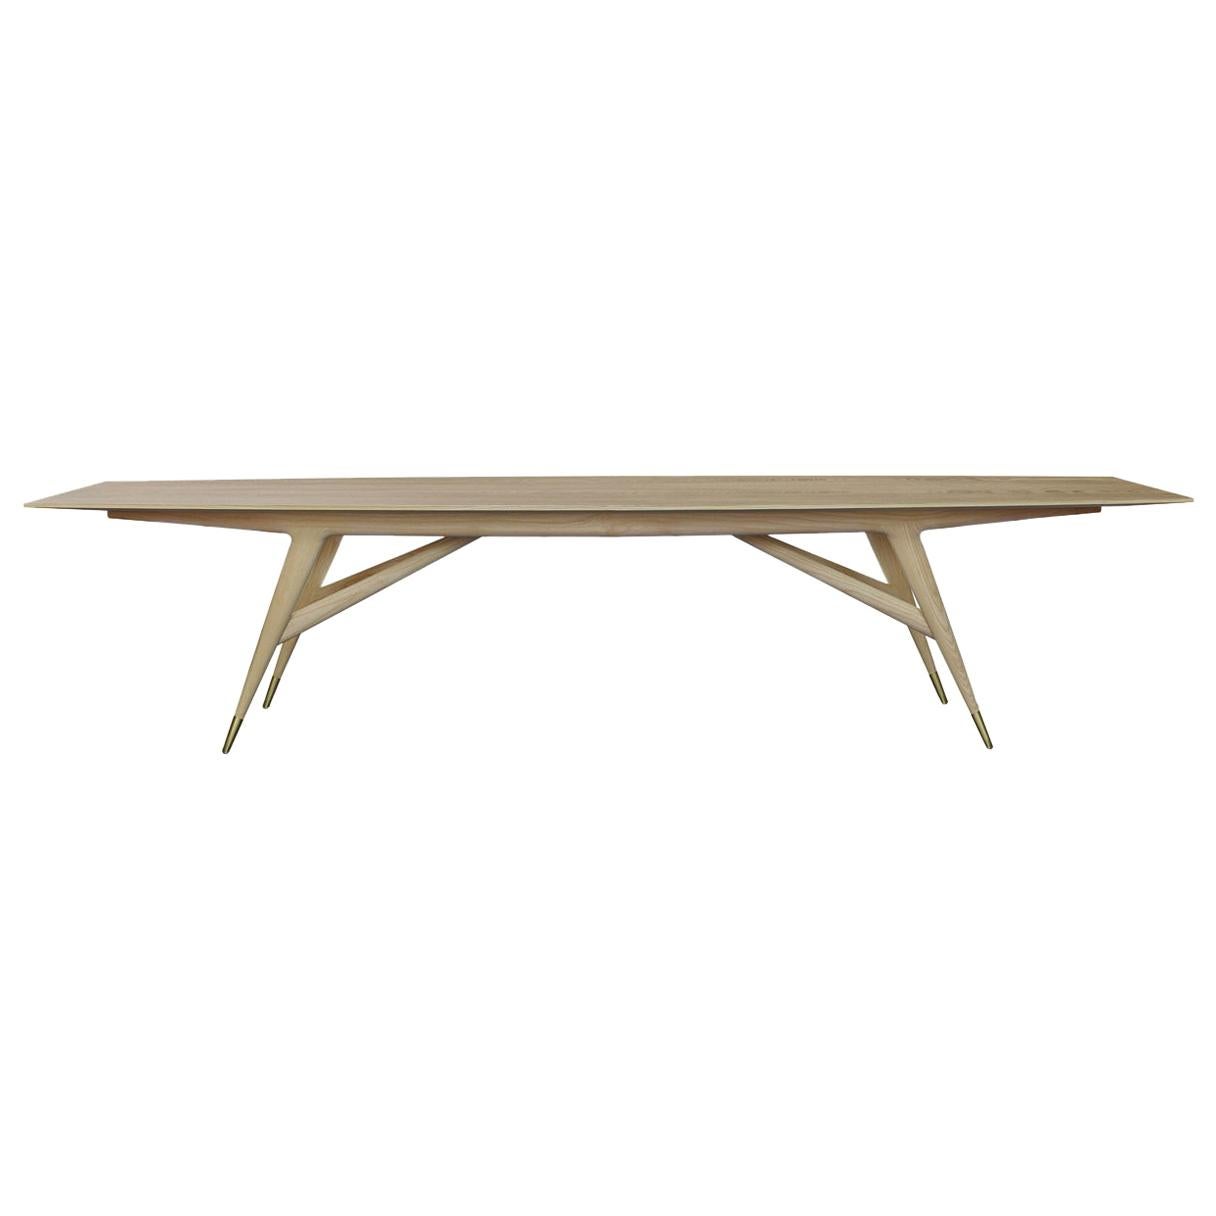 Beige (Natural Ash Wood) Dining 142" Table in Ash Wood Molteni&C by Gio Ponti- D.859.1C - Made in Italy